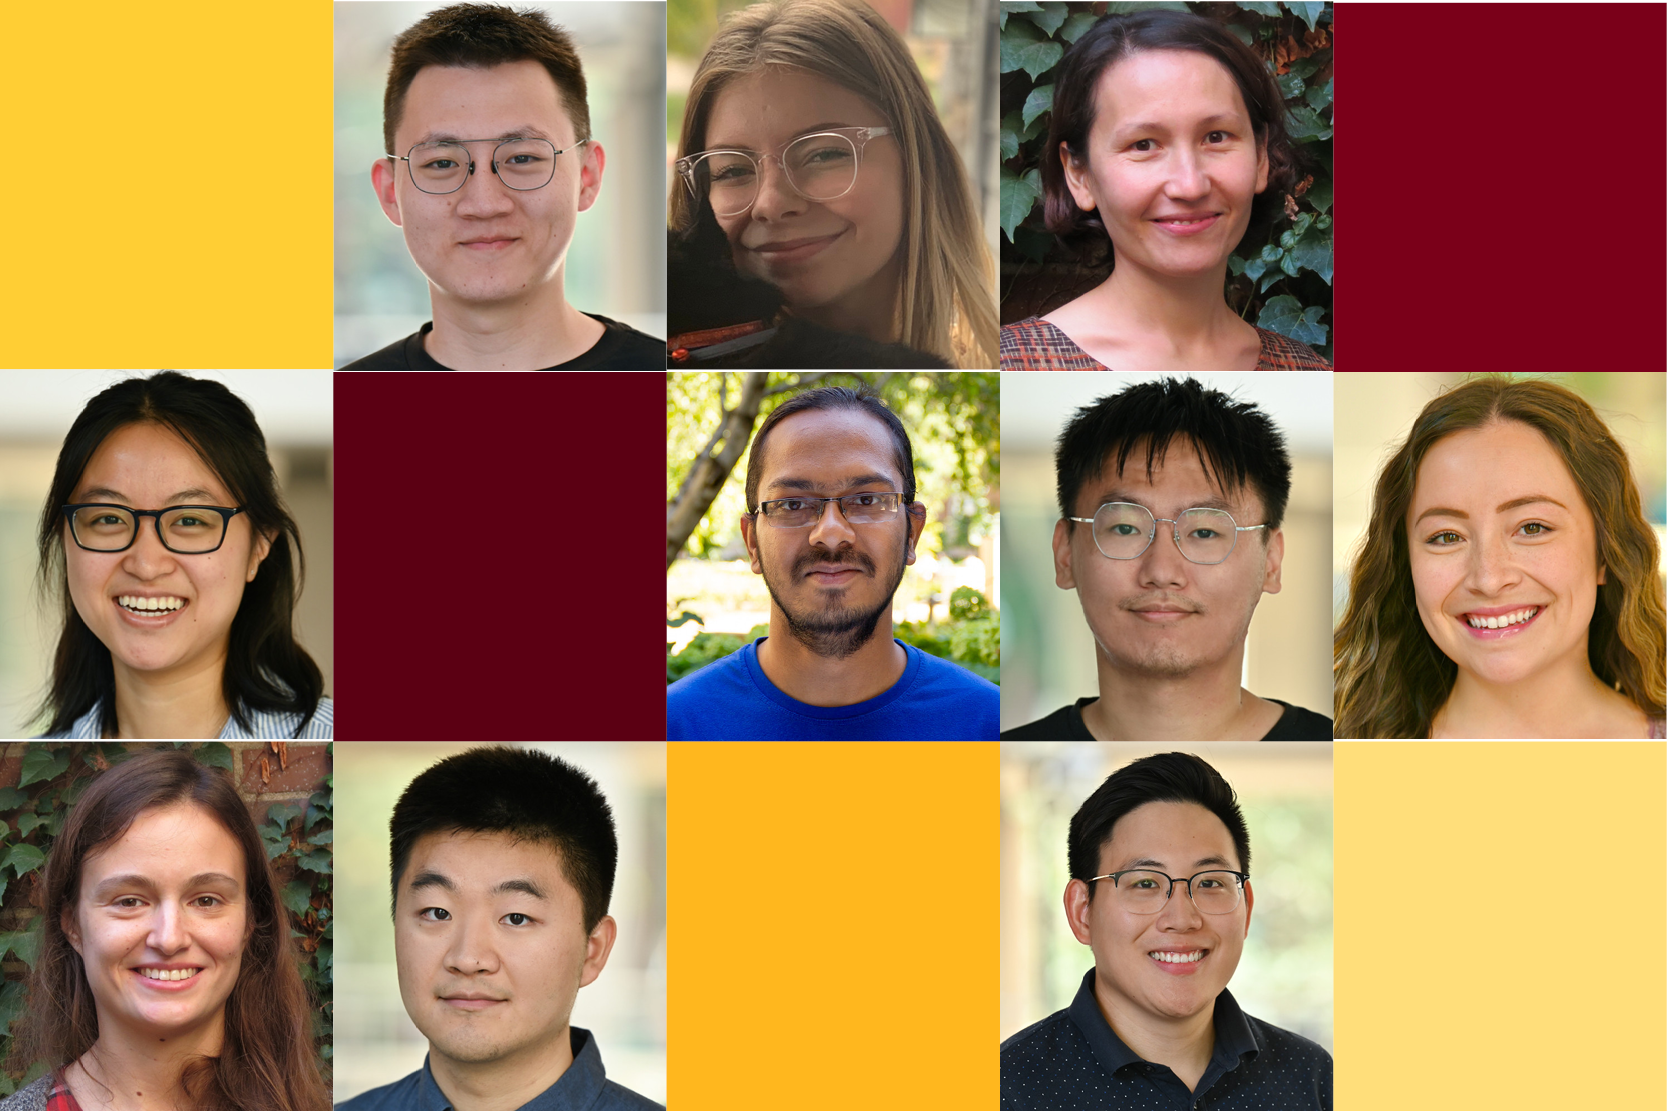 Headshot photographs of ten people with maroon and gold tile in between